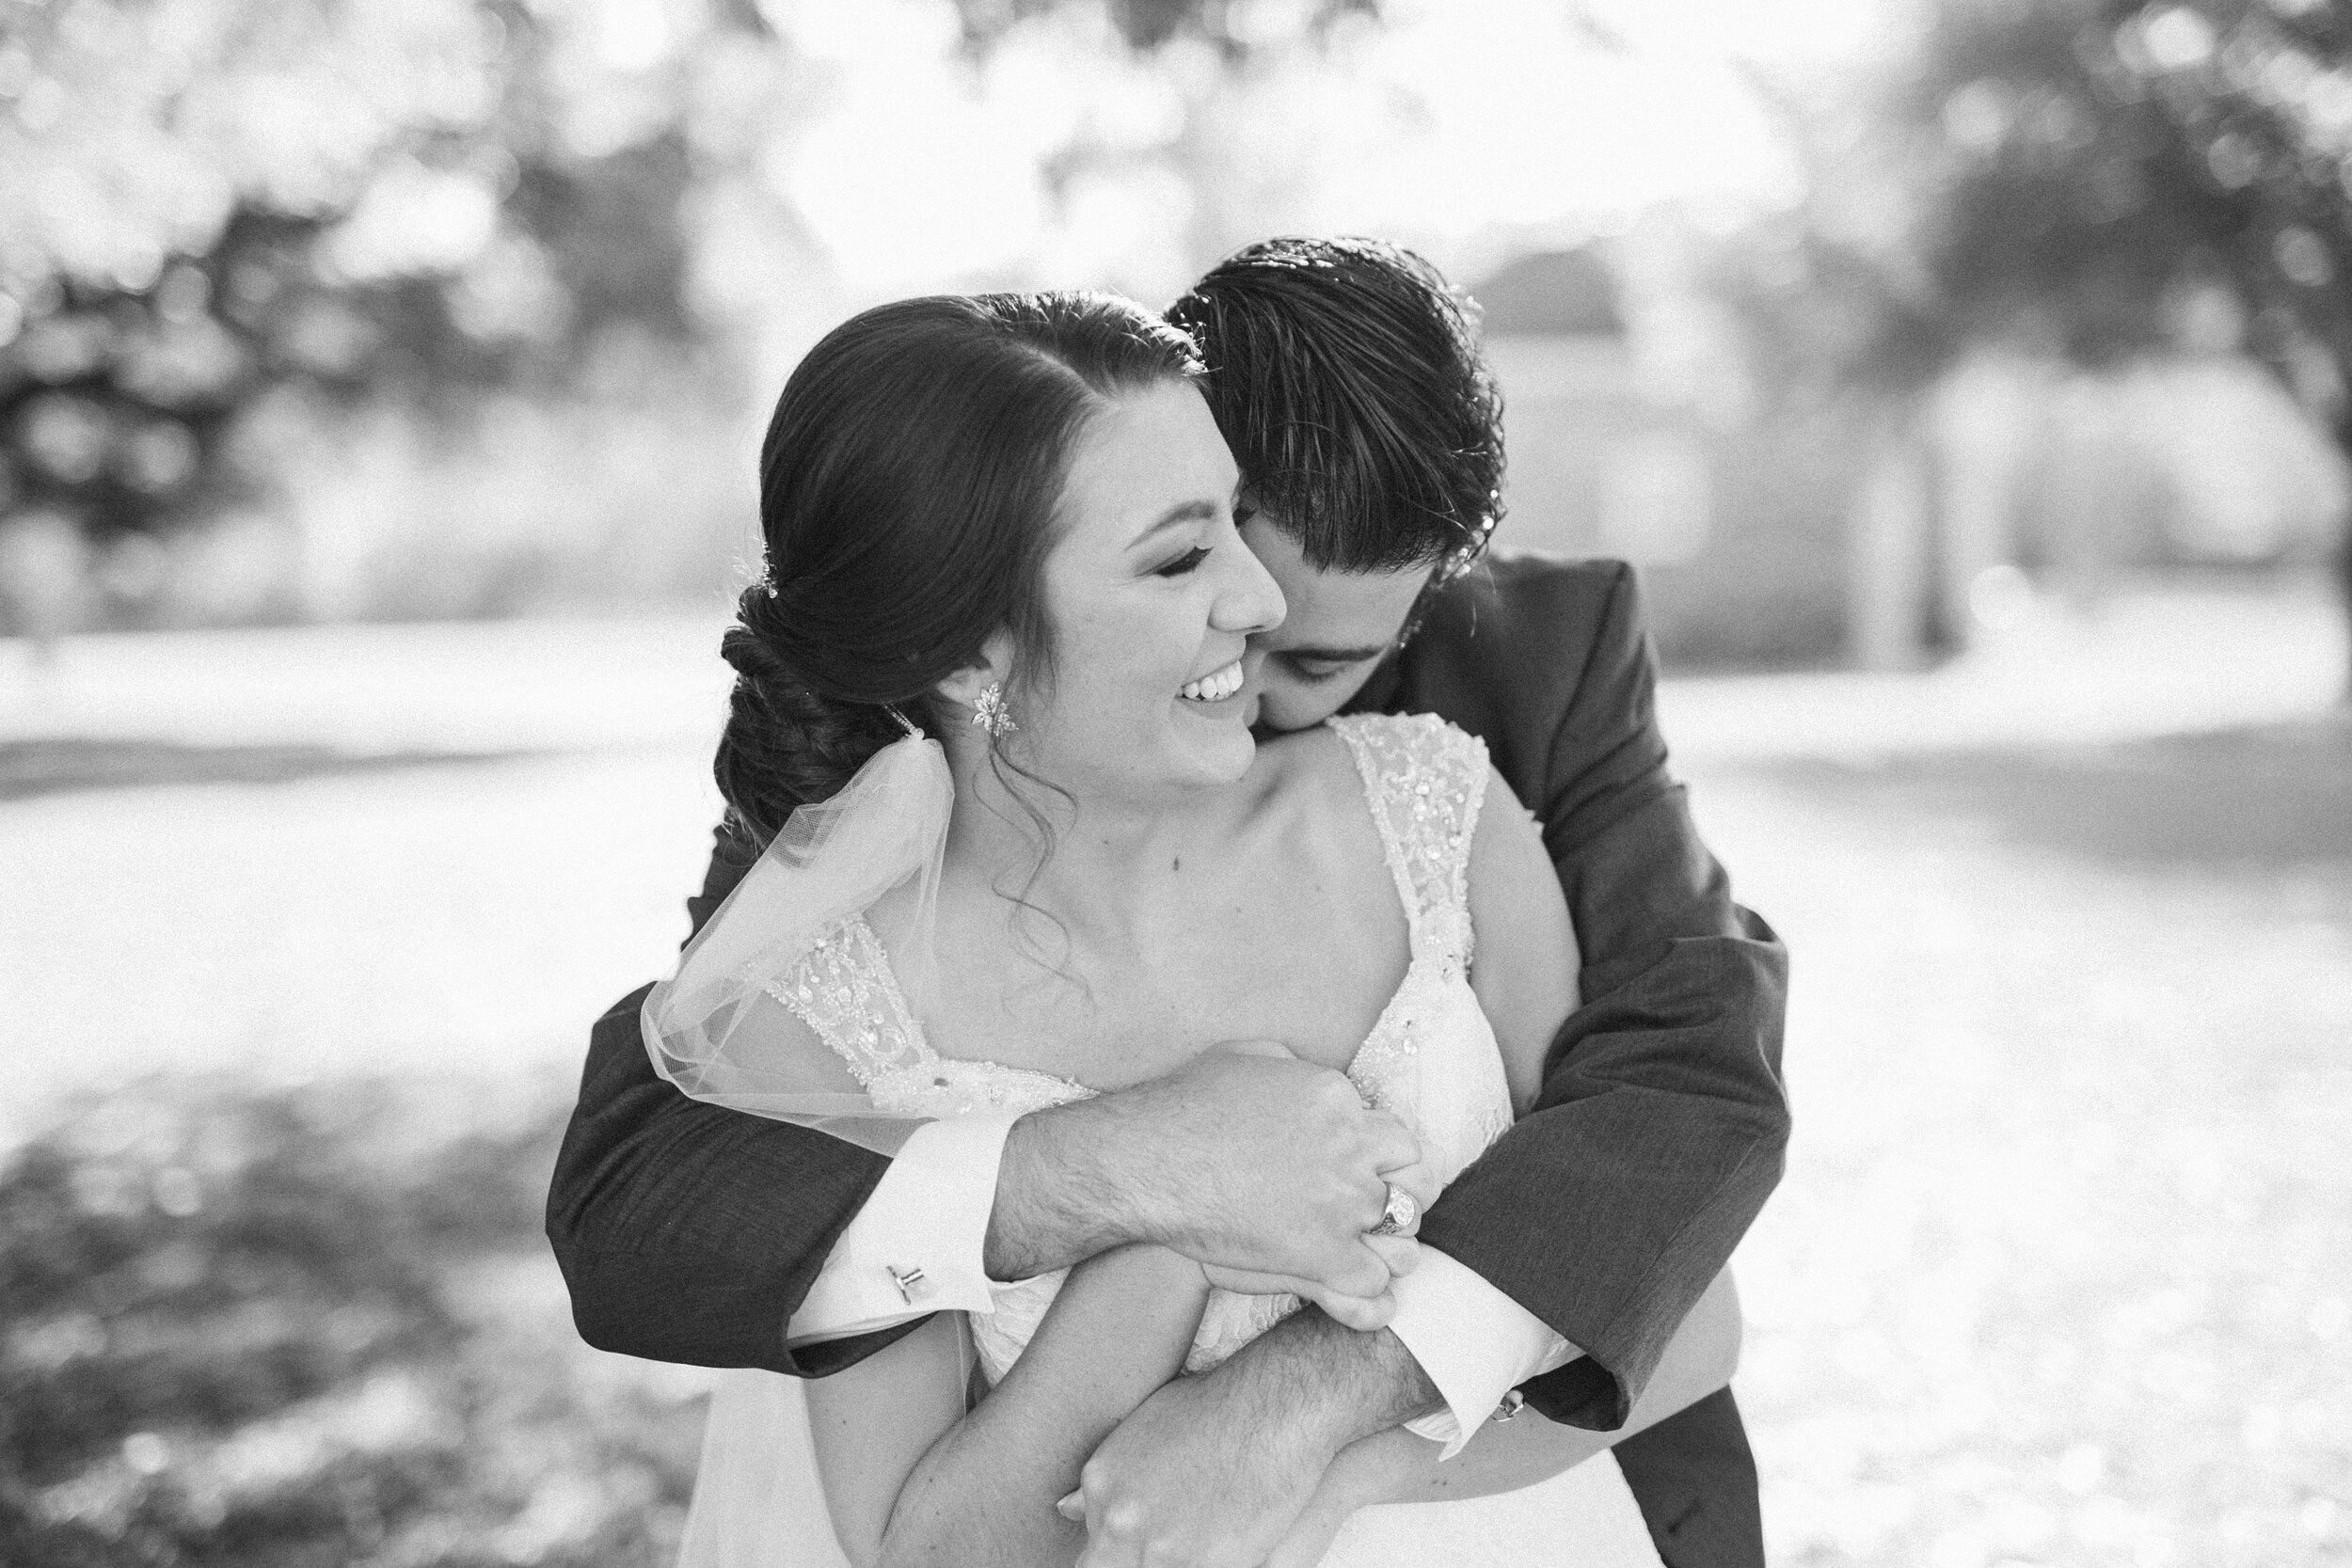 Bride and groom share a sweet, intimate moment in Charleston, South Carolina Christmas wedding.